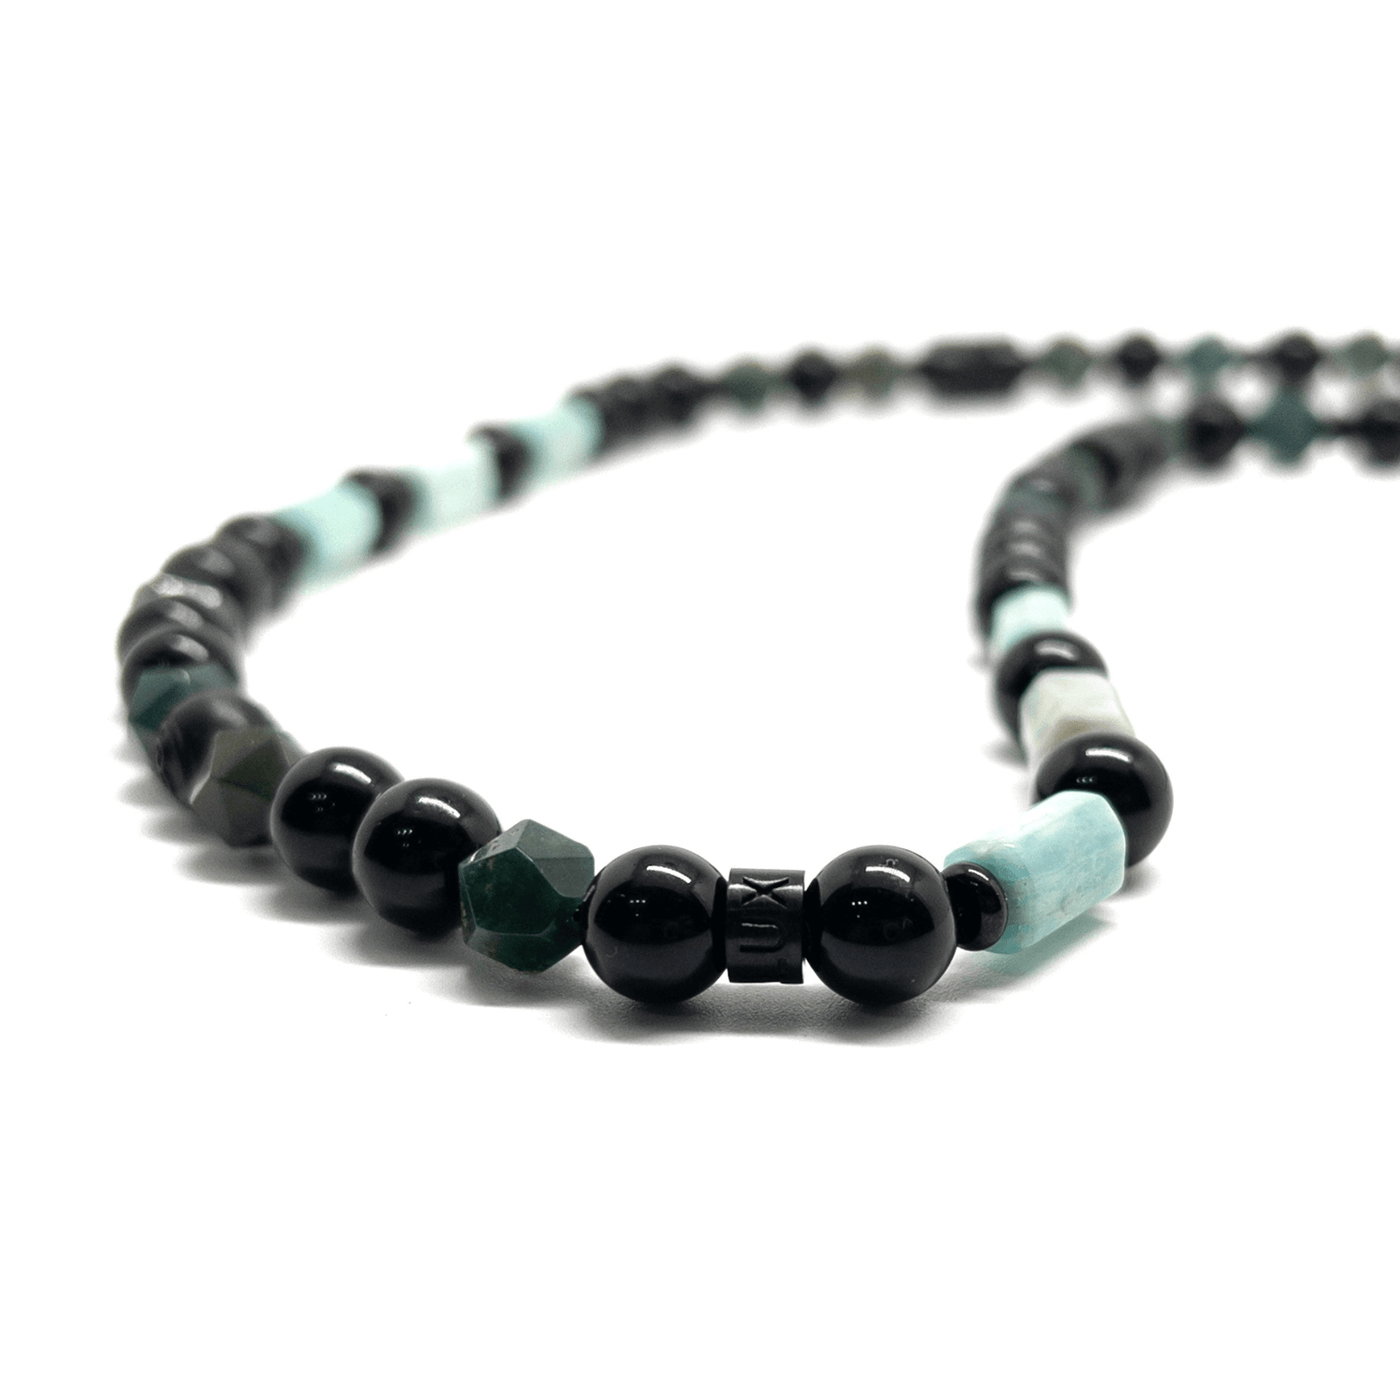 The Faceted Moss Green and Obsidian Stones Necklace